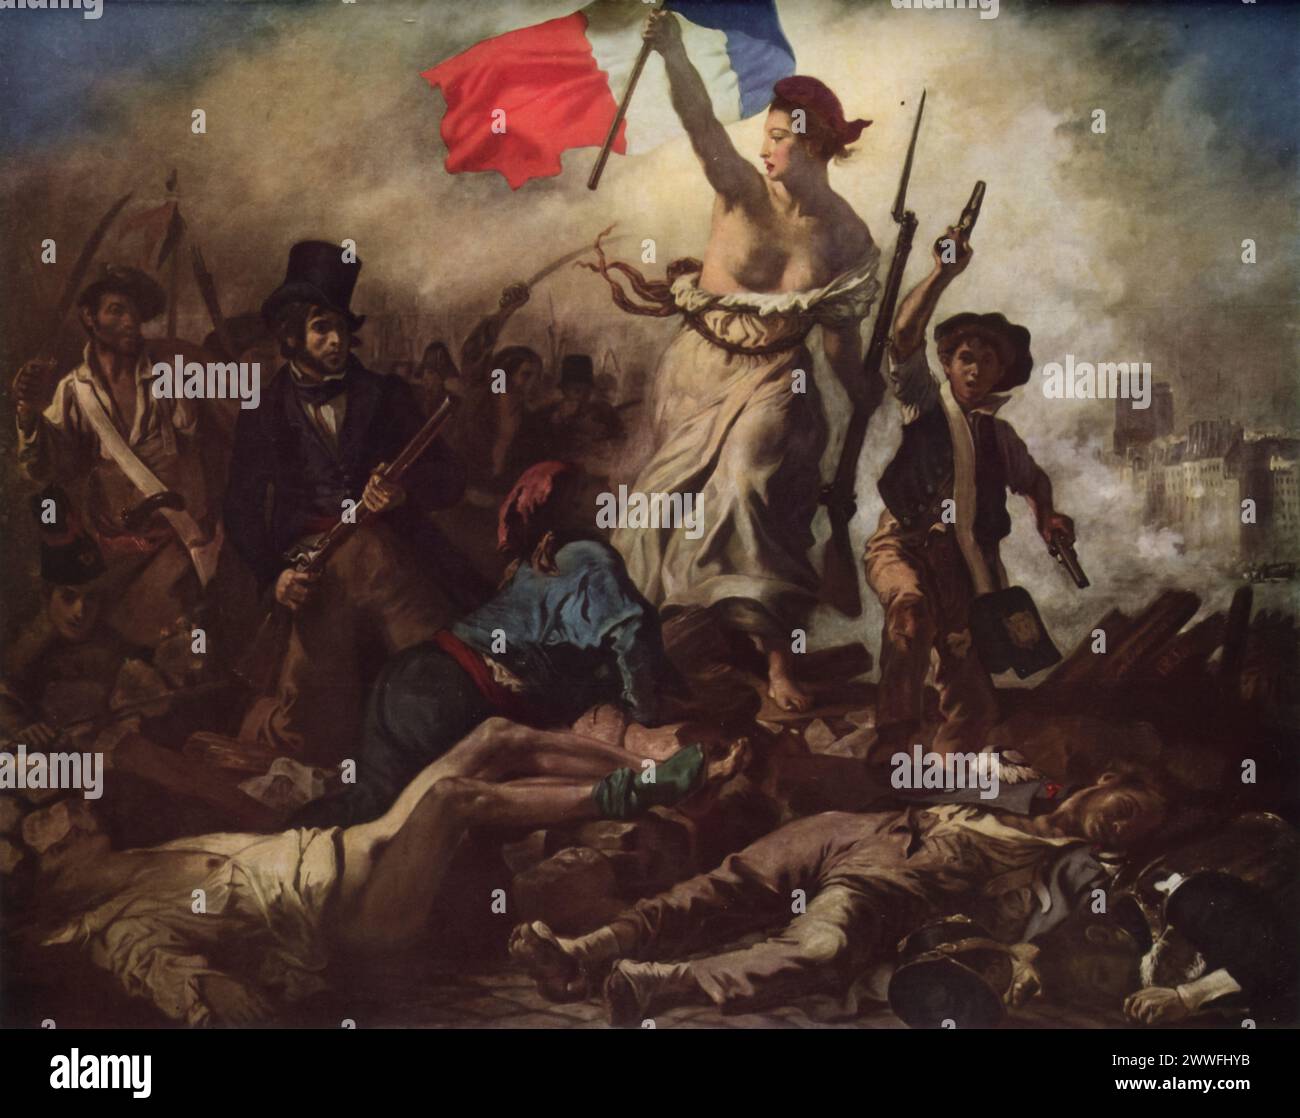 Eugène Delacroix's 'Liberty Leading the People' (circa 1830): Housed in the Louvre Museum, Paris, this iconic painting commemorates the July Revolution of 1830 in France. It depicts a personified Liberty leading a charge over the barricades, with the French tricolor held high. The work brilliantly captures the essence of the struggle for freedom and justice, becoming a symbol of political change and the fight for liberty. Stock Photo